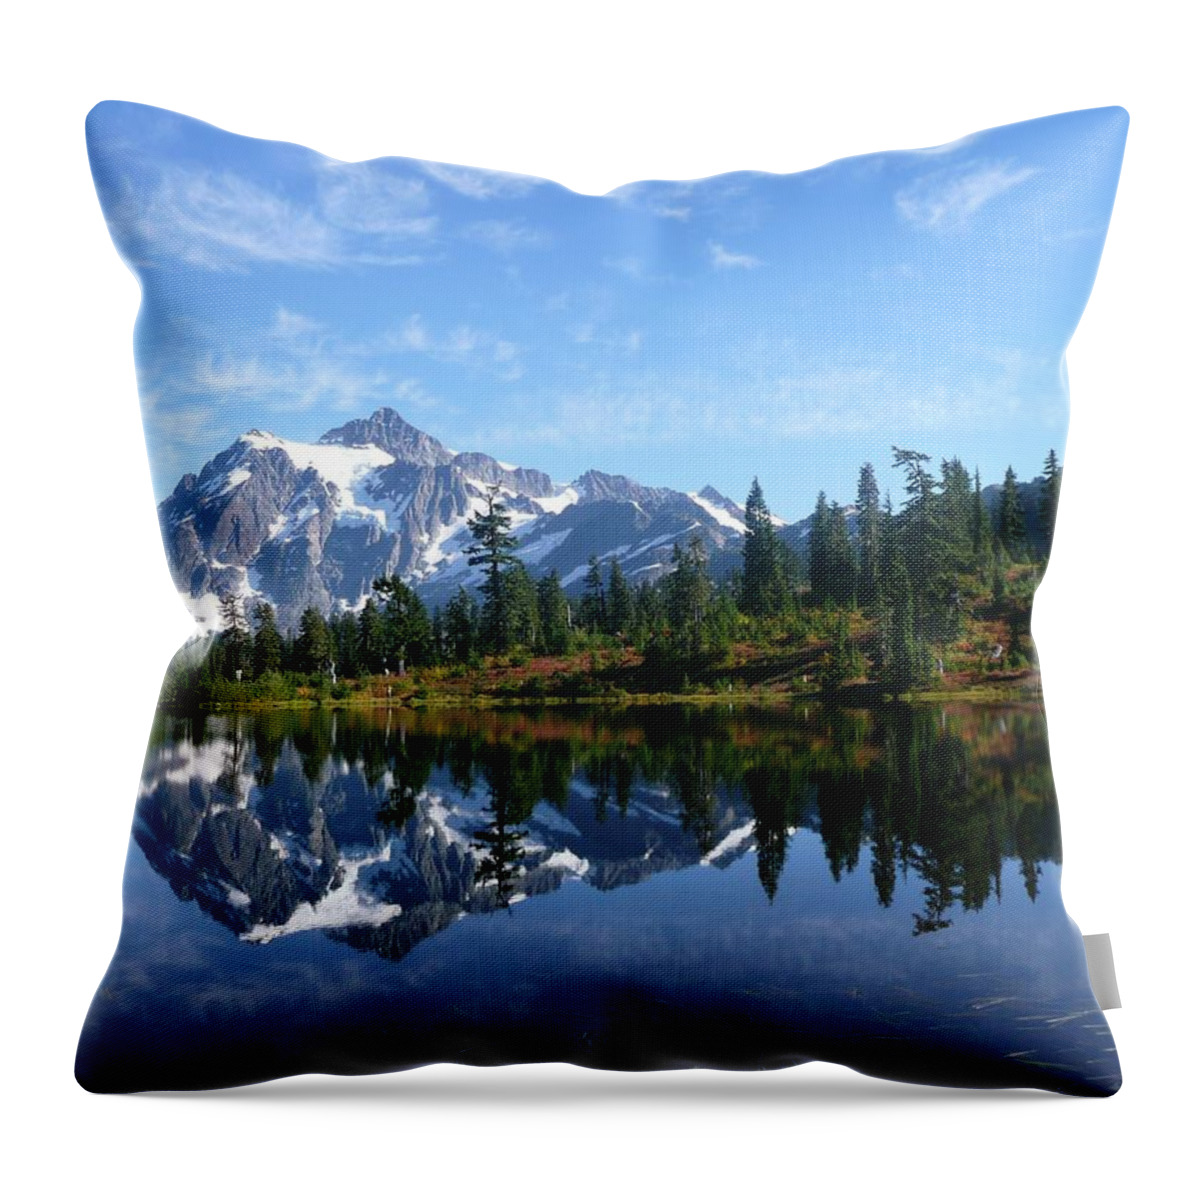 Mount Shuksan Throw Pillow featuring the photograph Picture Lake by Priya Ghose